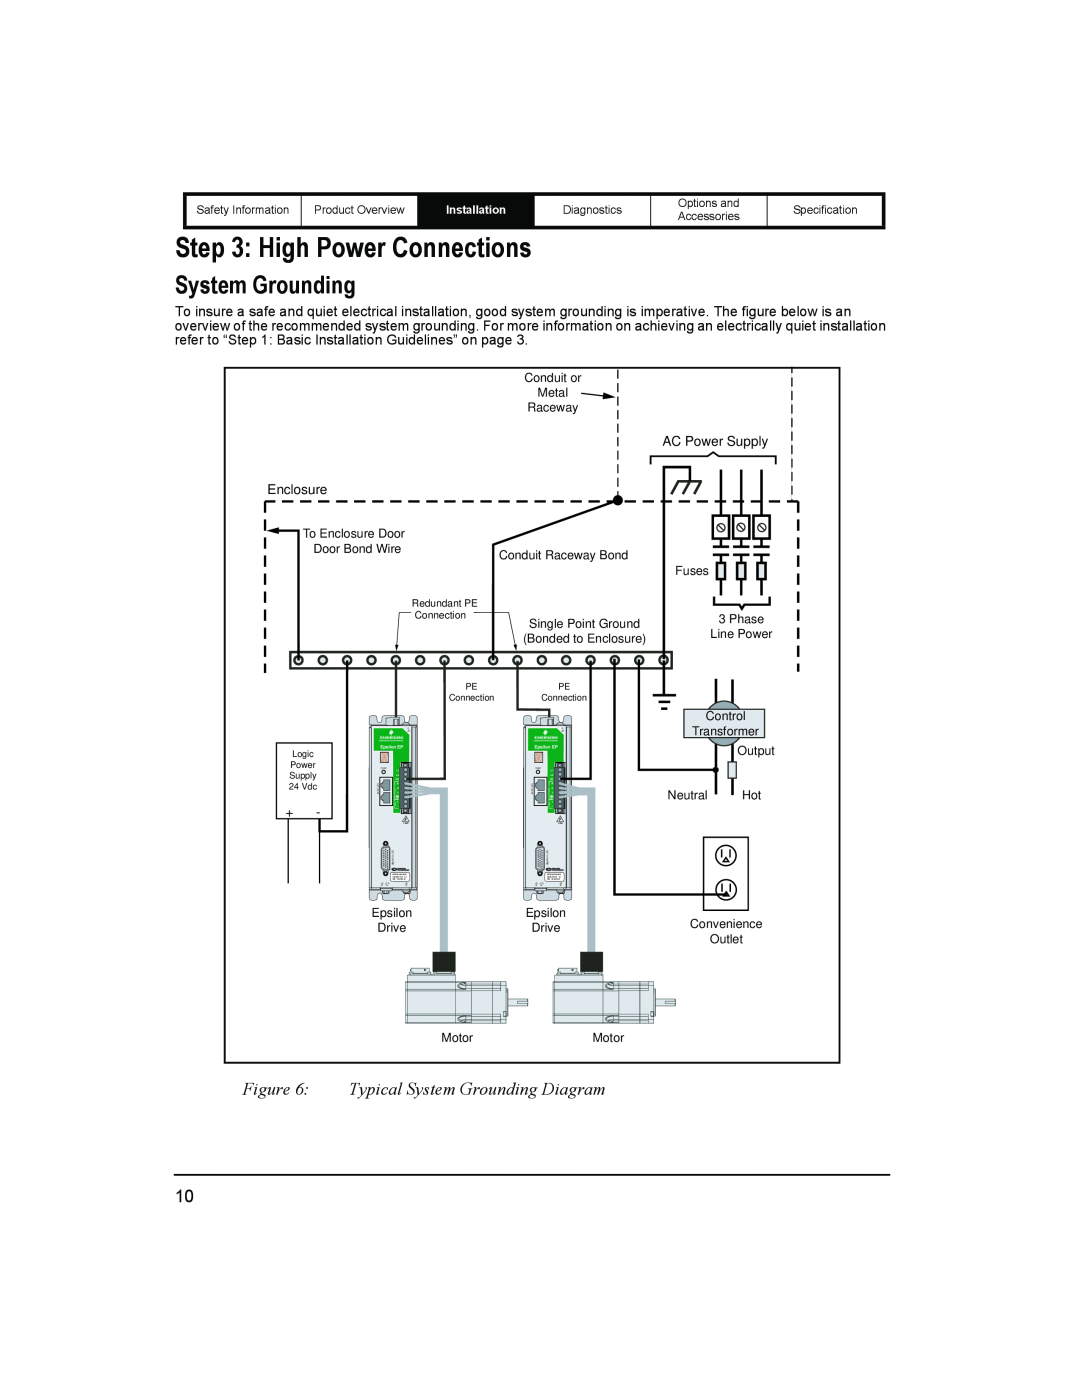 Emerson 400518-01 High Power Connections, Typical System Grounding Diagram, AC Power Supply, Installation 